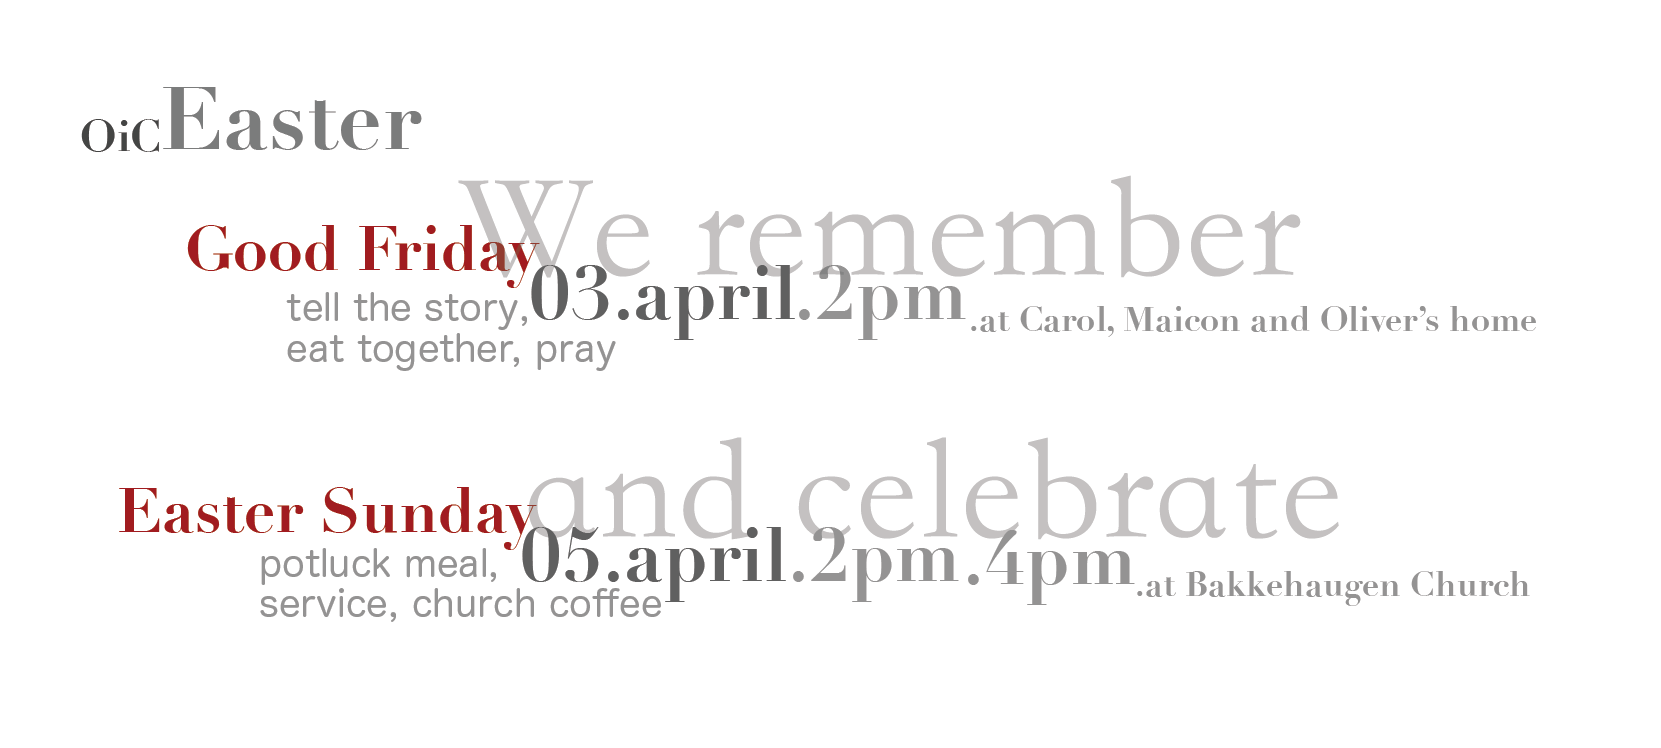 Graphic depicting Easter events.